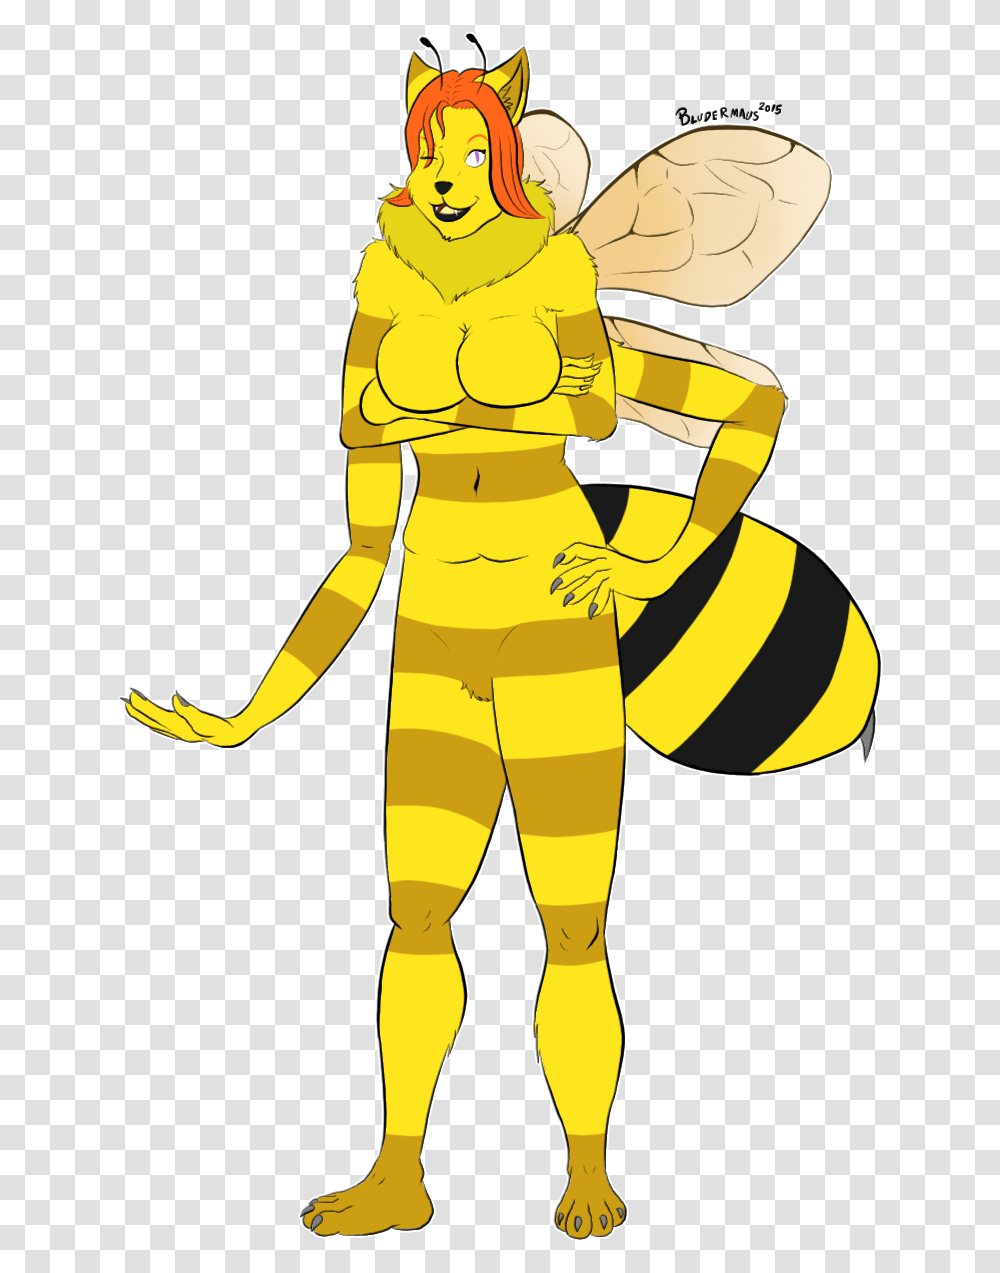 New Queen Bee In The Hive Cartoon, Wasp, Insect, Invertebrate, Animal Transparent Png